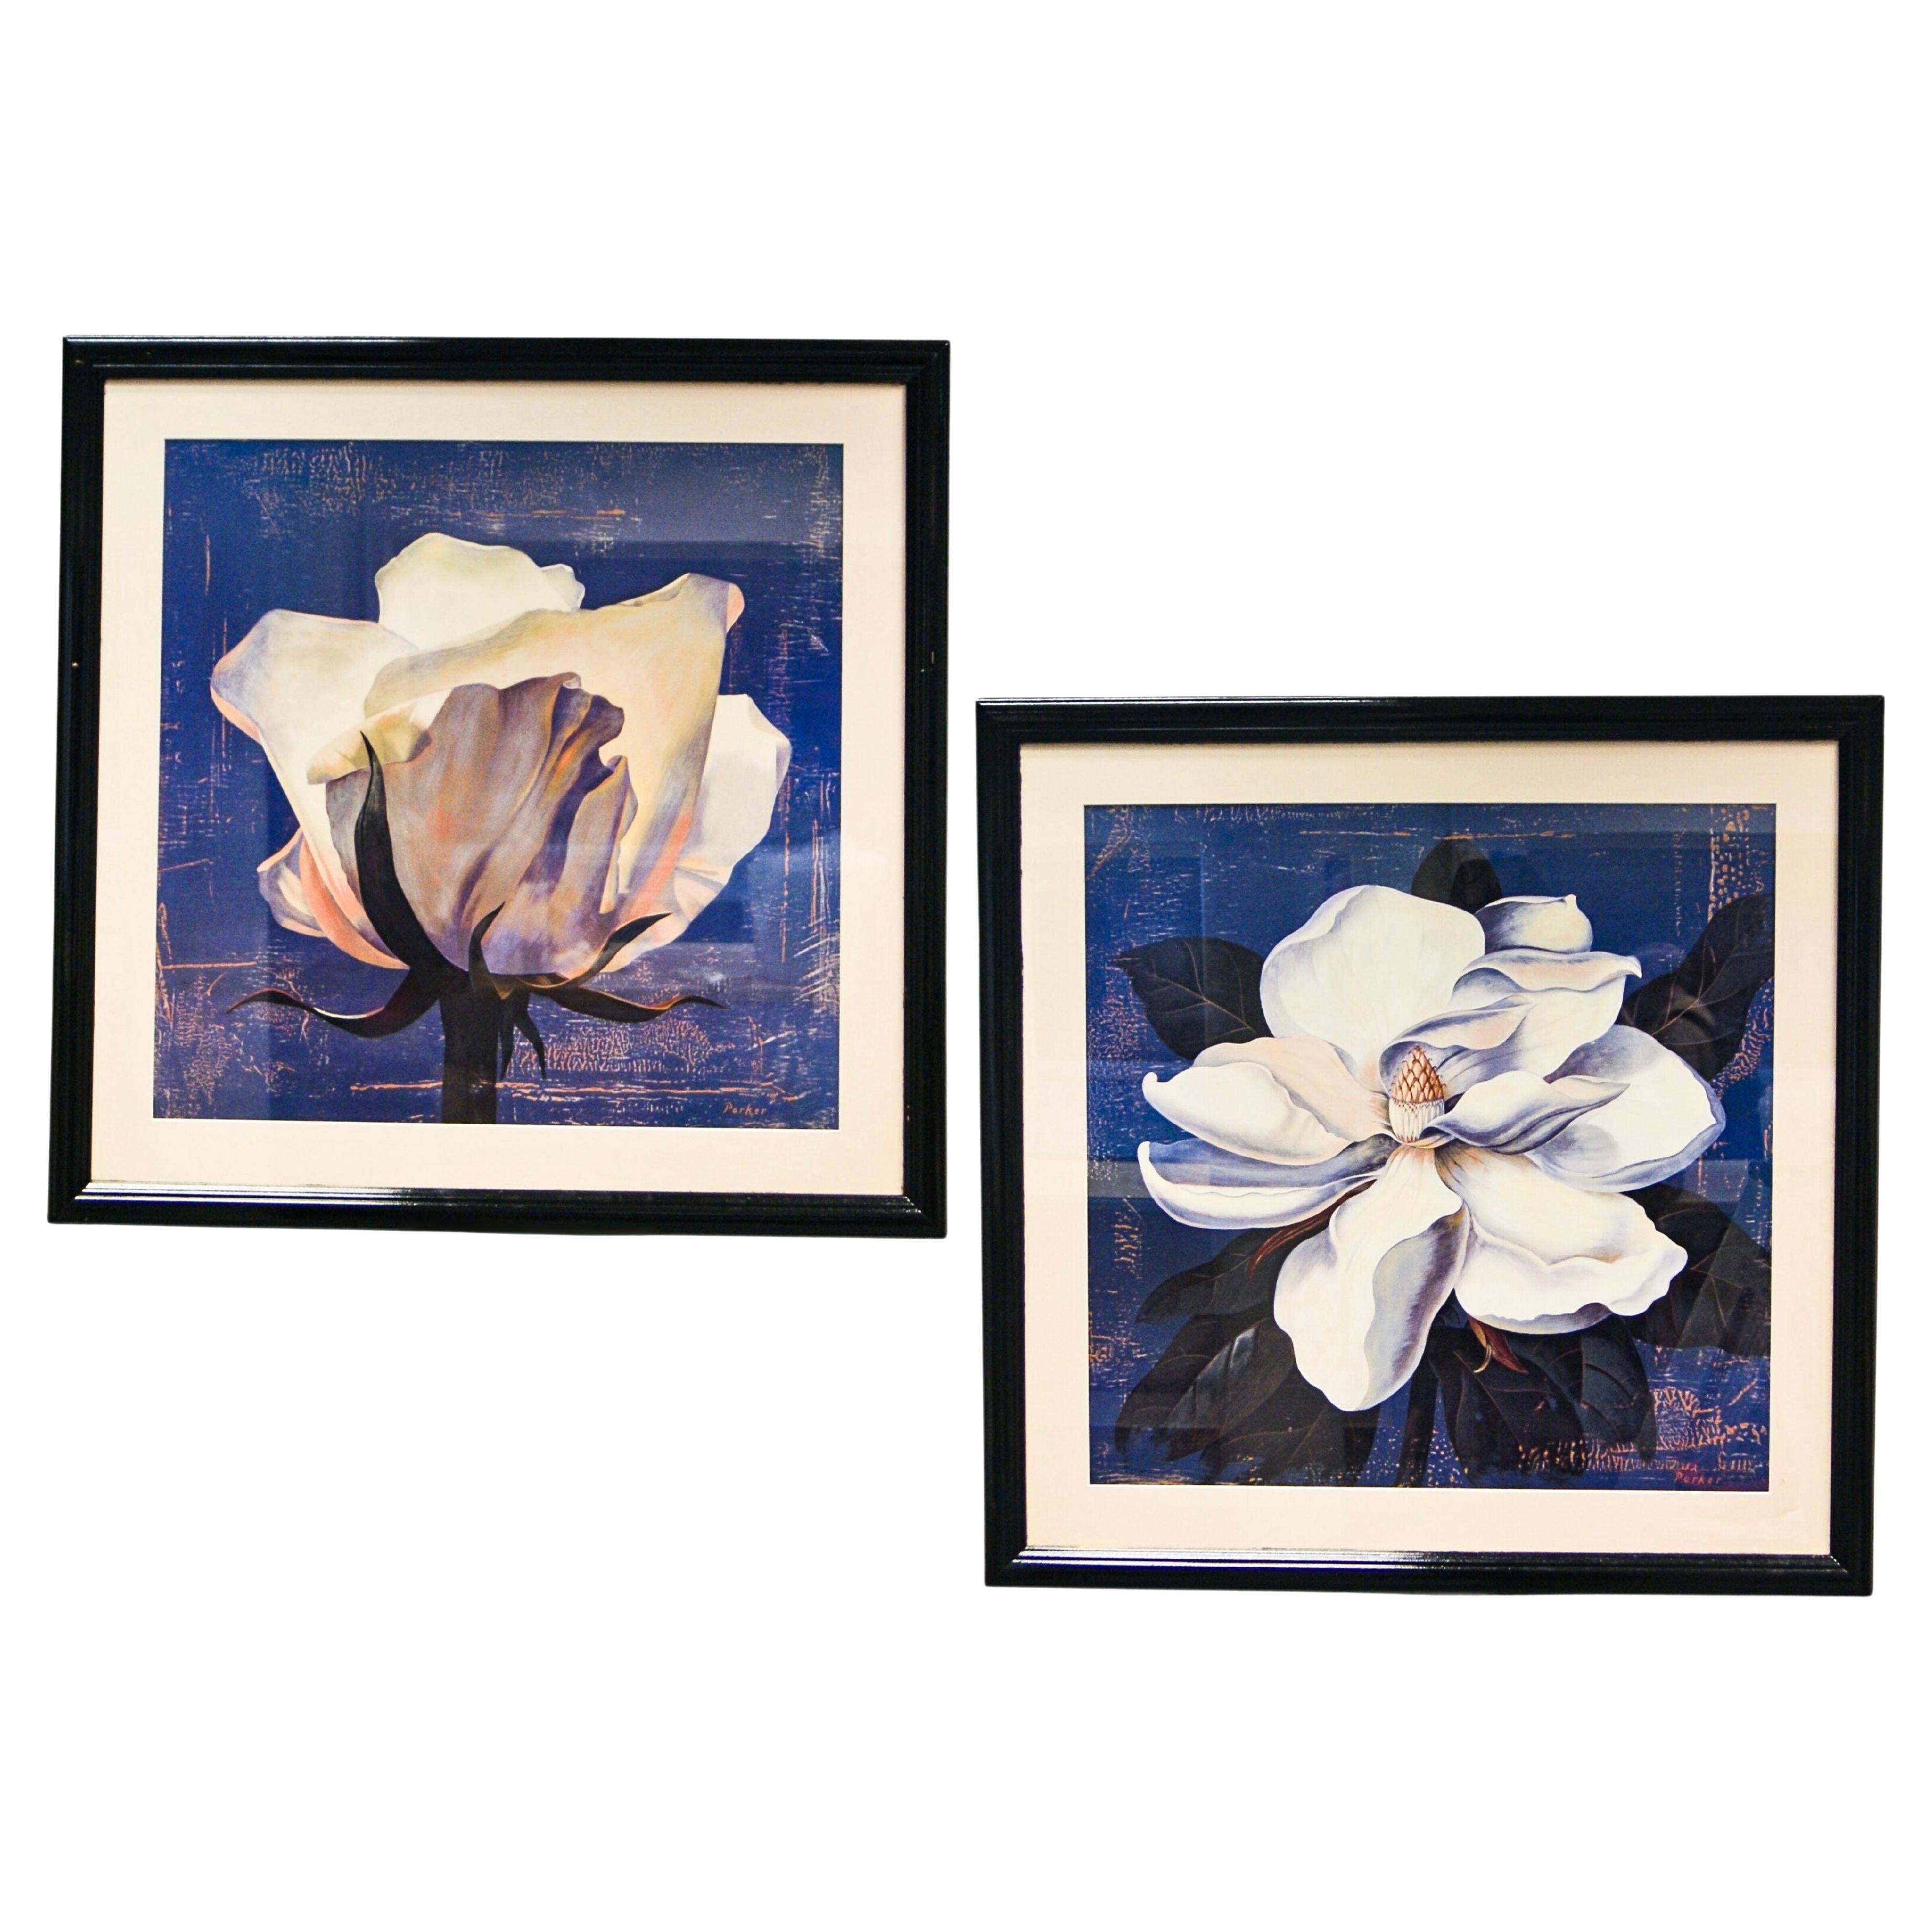 Framed Art Prints by Curtis Parker Glowing Magnolia & Glowing White Rose For Sale